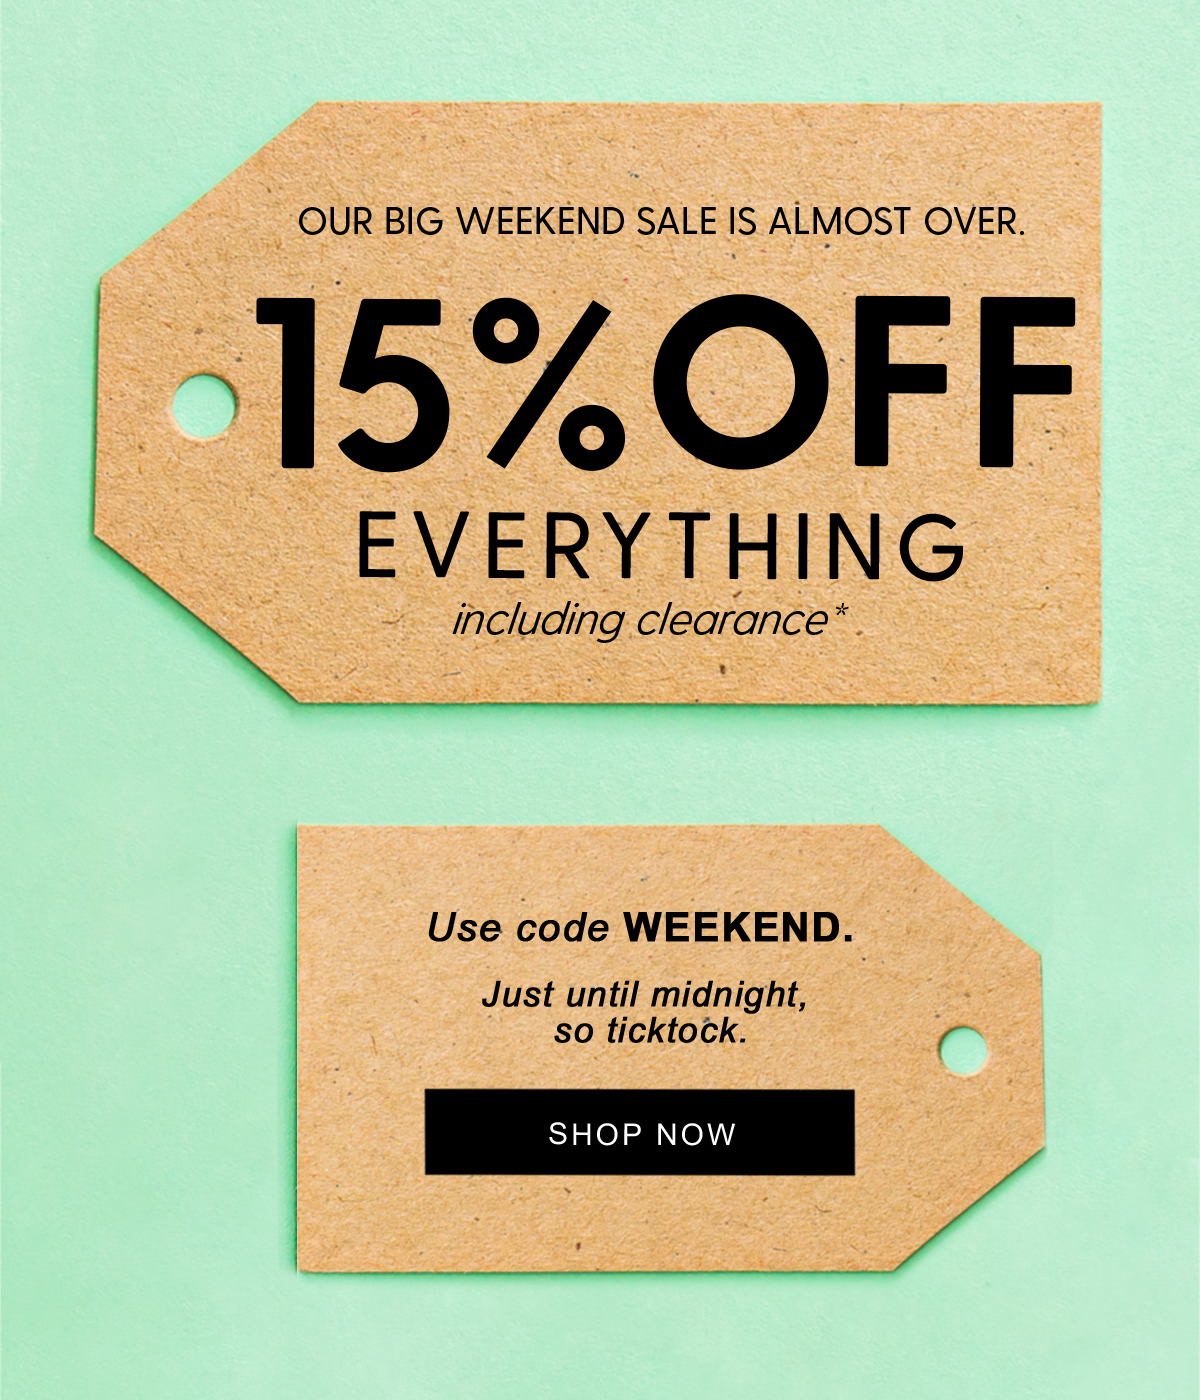 Our big weekend sale is almost over.   15% off  Everything including clearance*   Use code WEEKEND. Just until midnight, so ticktock.   Shop Now